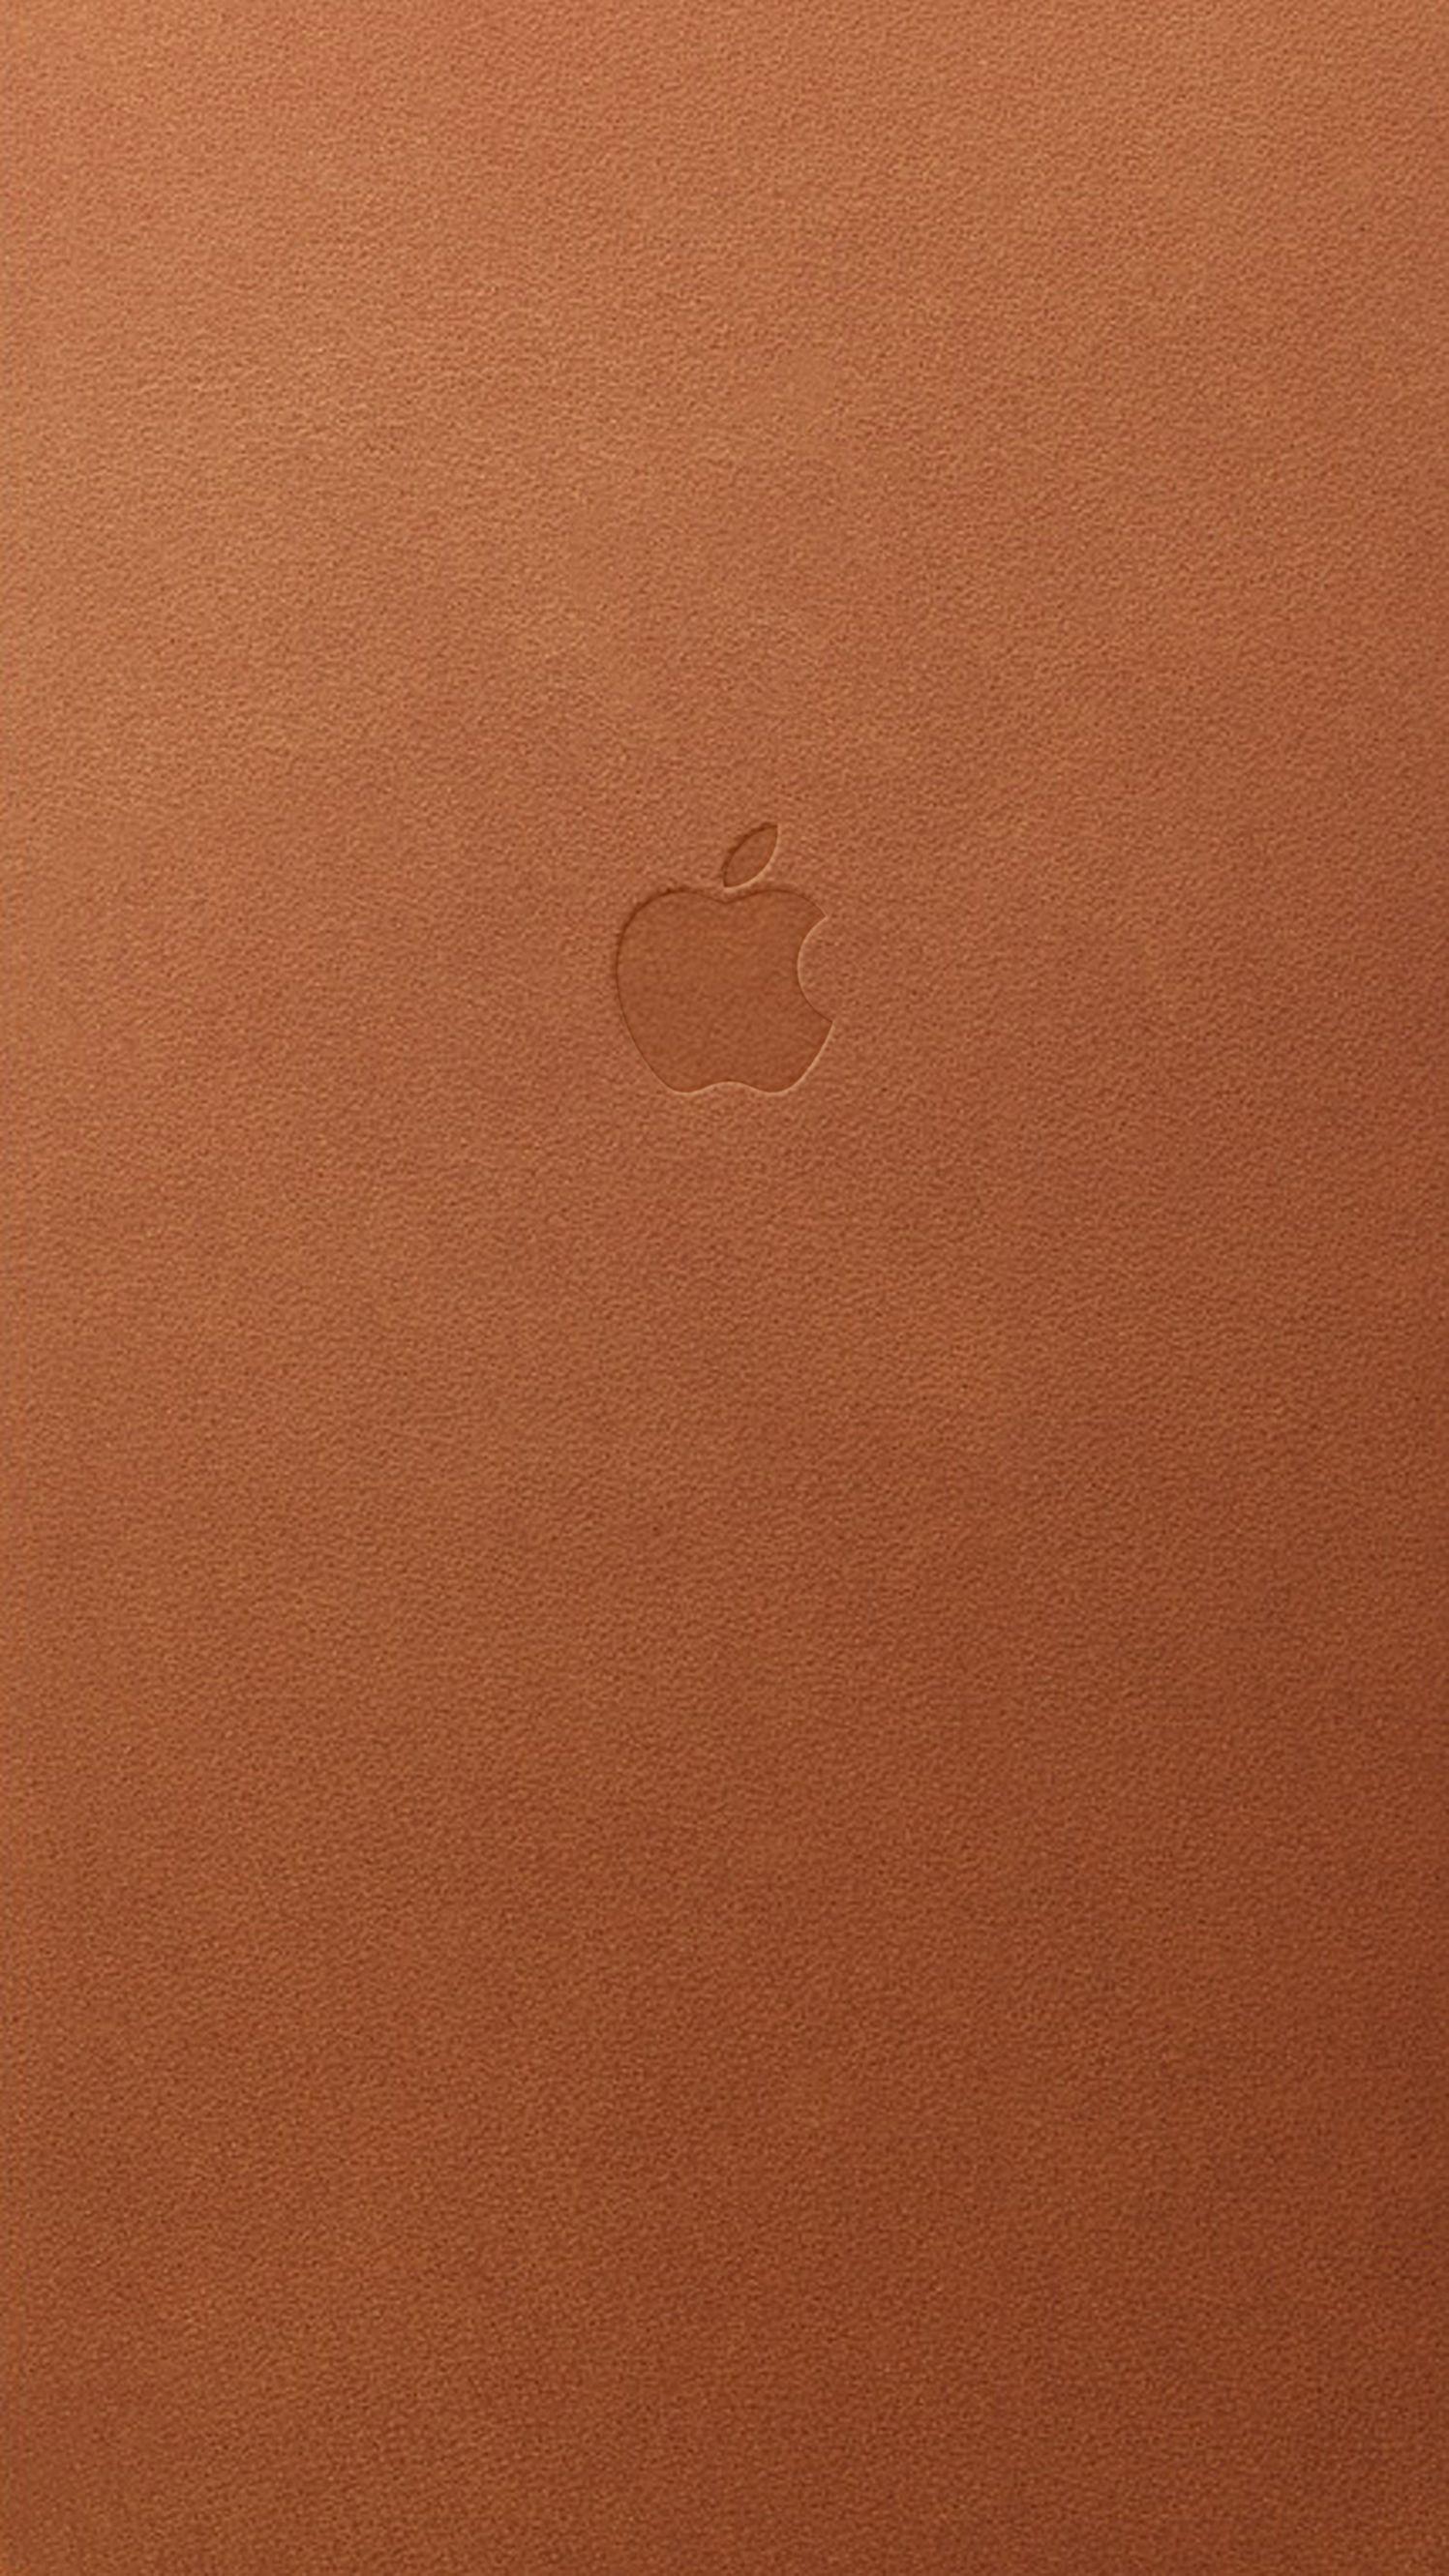 These wallpaper will match your Apple leather case. HD Wallpaper